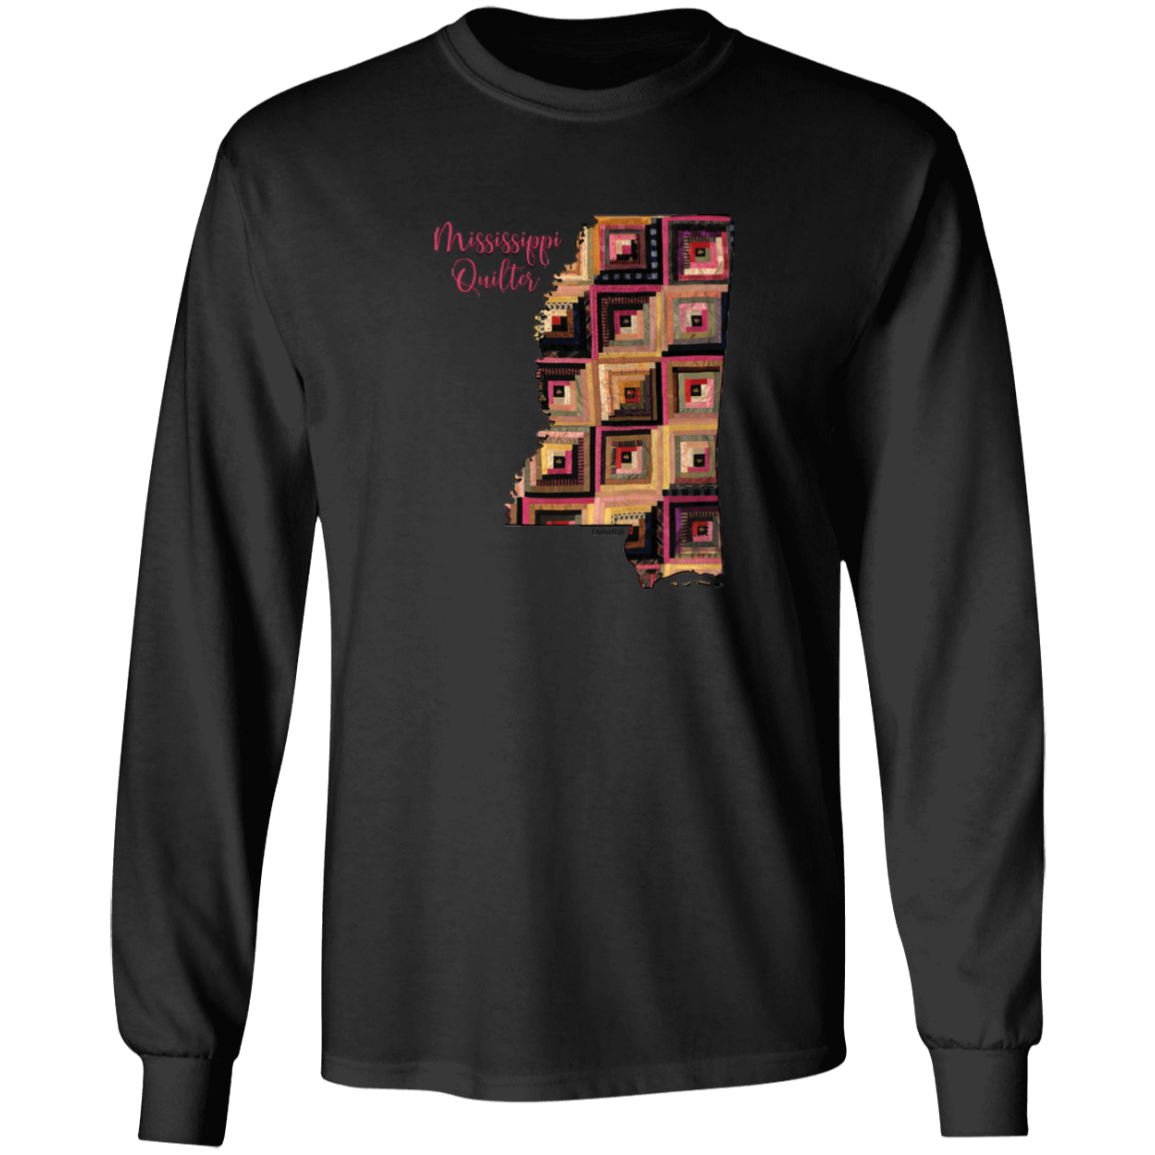 Mississippi Quilter Long Sleeve T-Shirt, Gift for Quilting Friends and Family